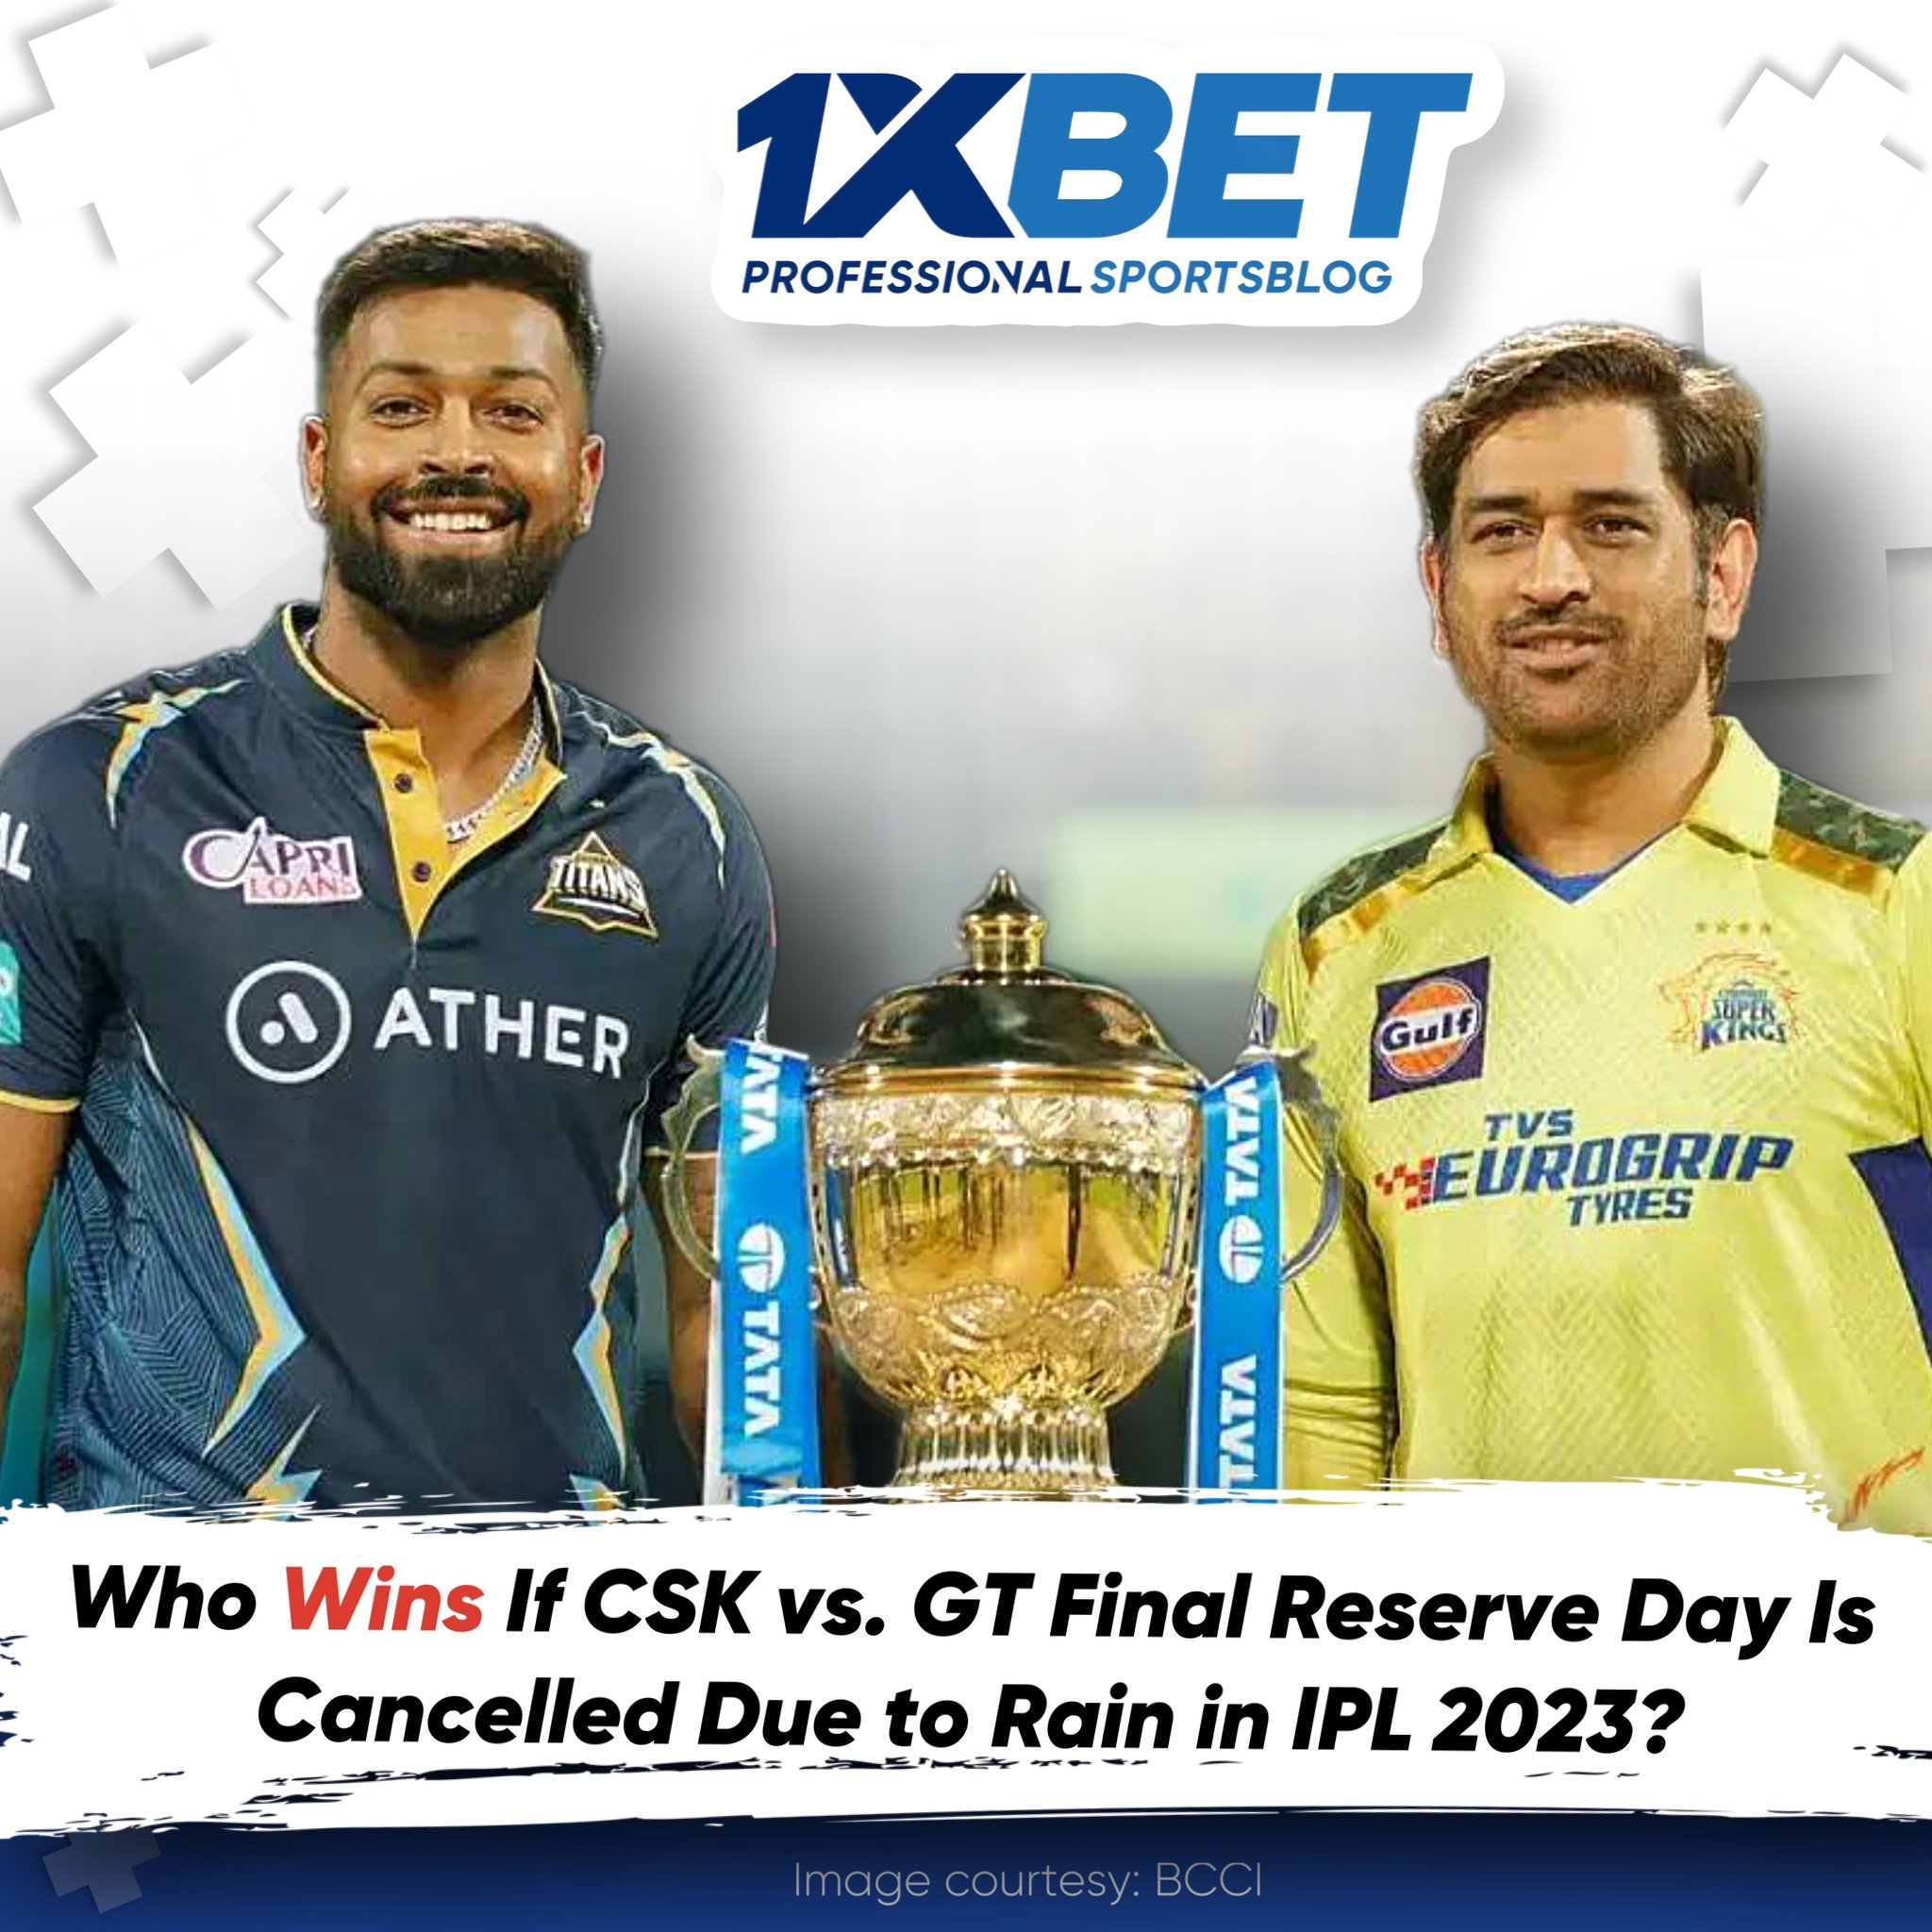 Who Wins If CSK vs. GT Final Reserve Day Is Cancelled Due to Rain in IPL 2023?